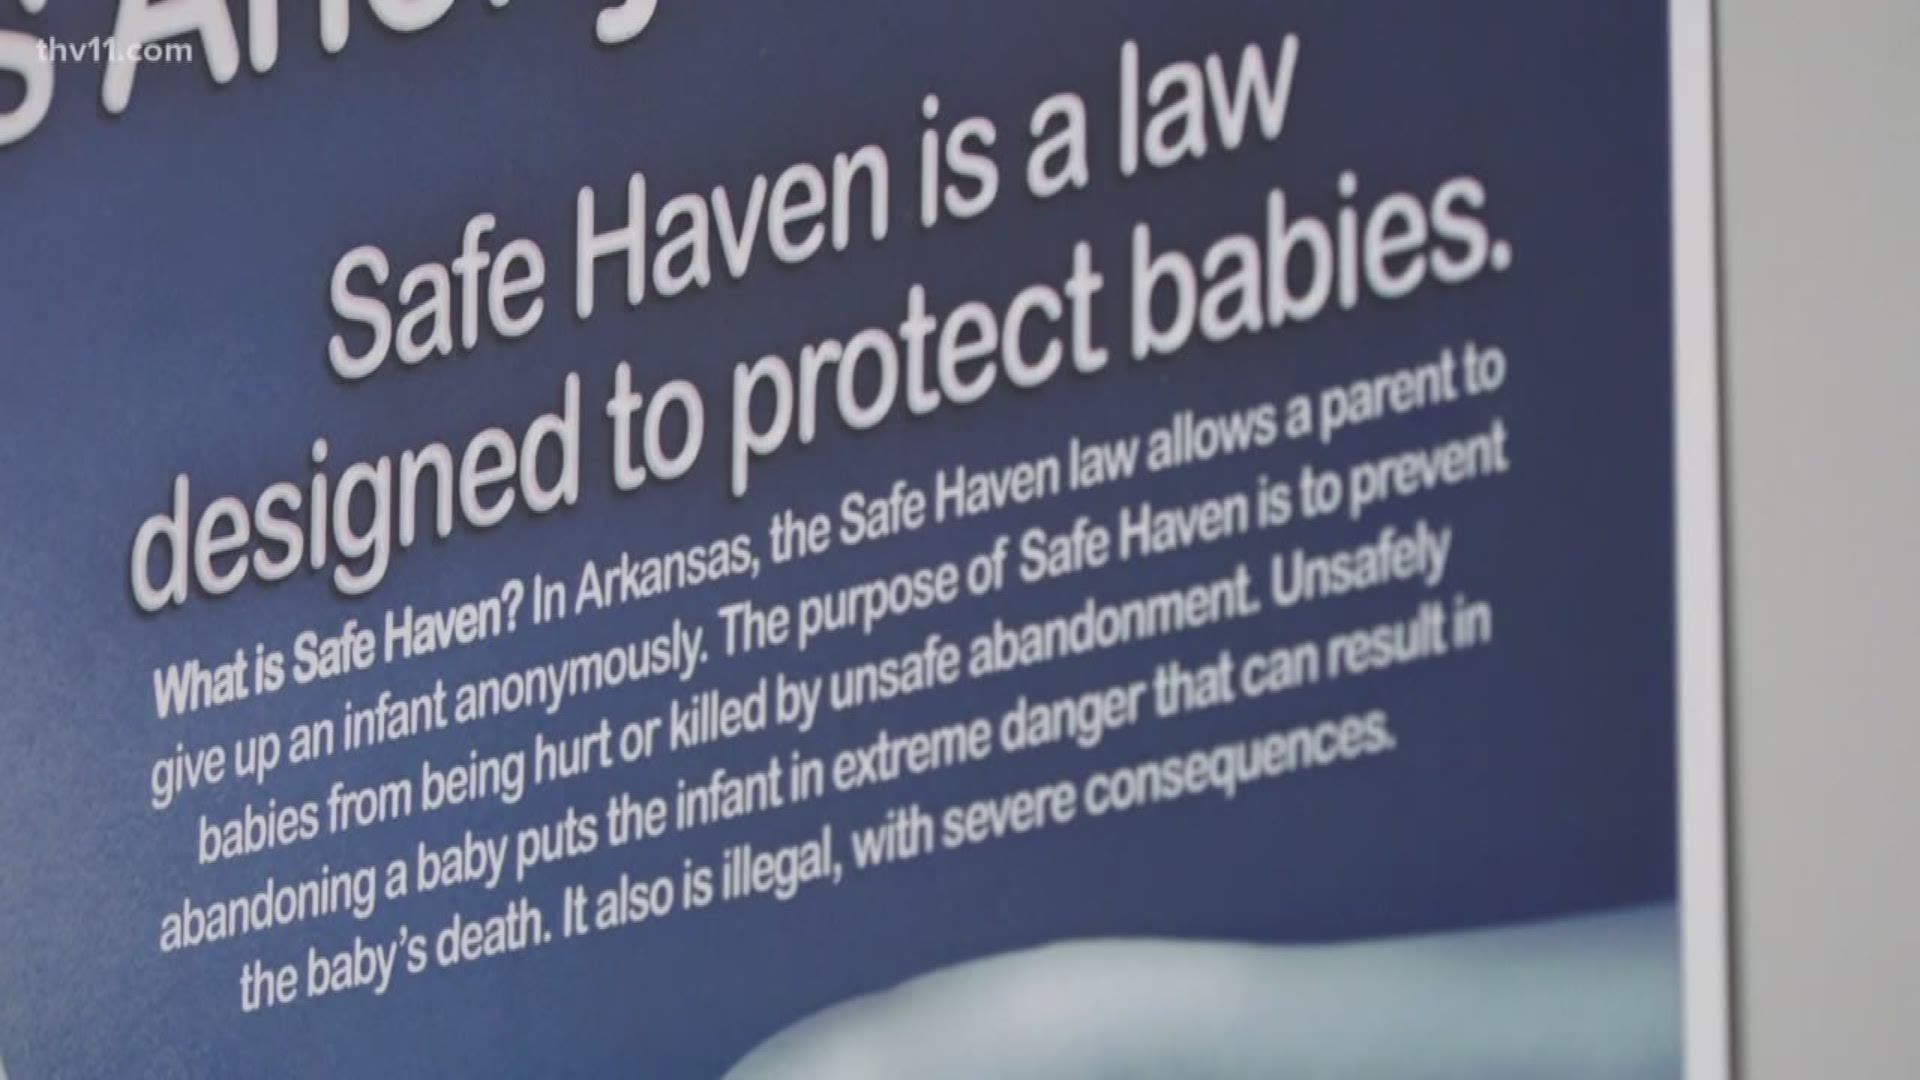 Starting in July, unwanted newborn babies may become better protected. The state's Safe Haven Law was amended this year.